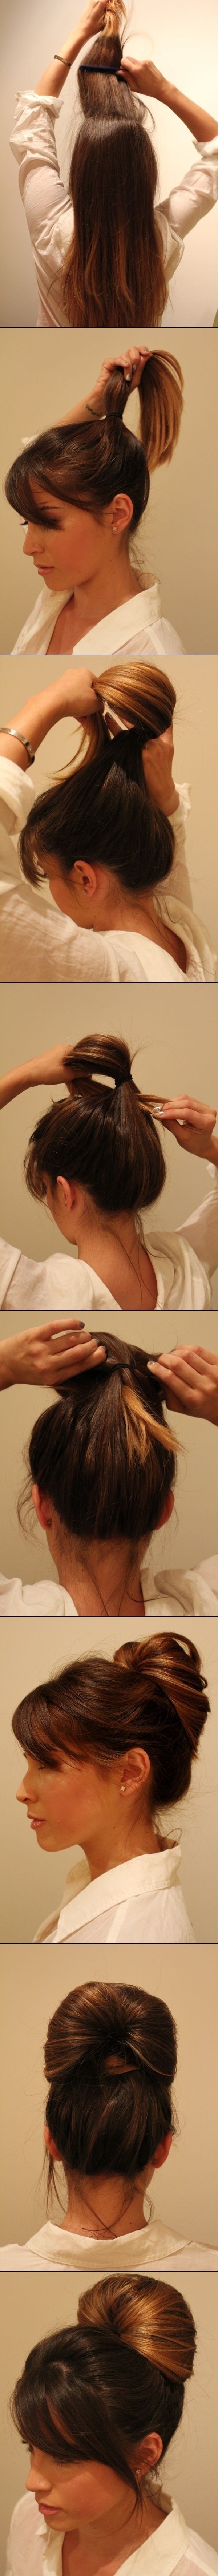 Simple Five Minute Hairstyles (44)